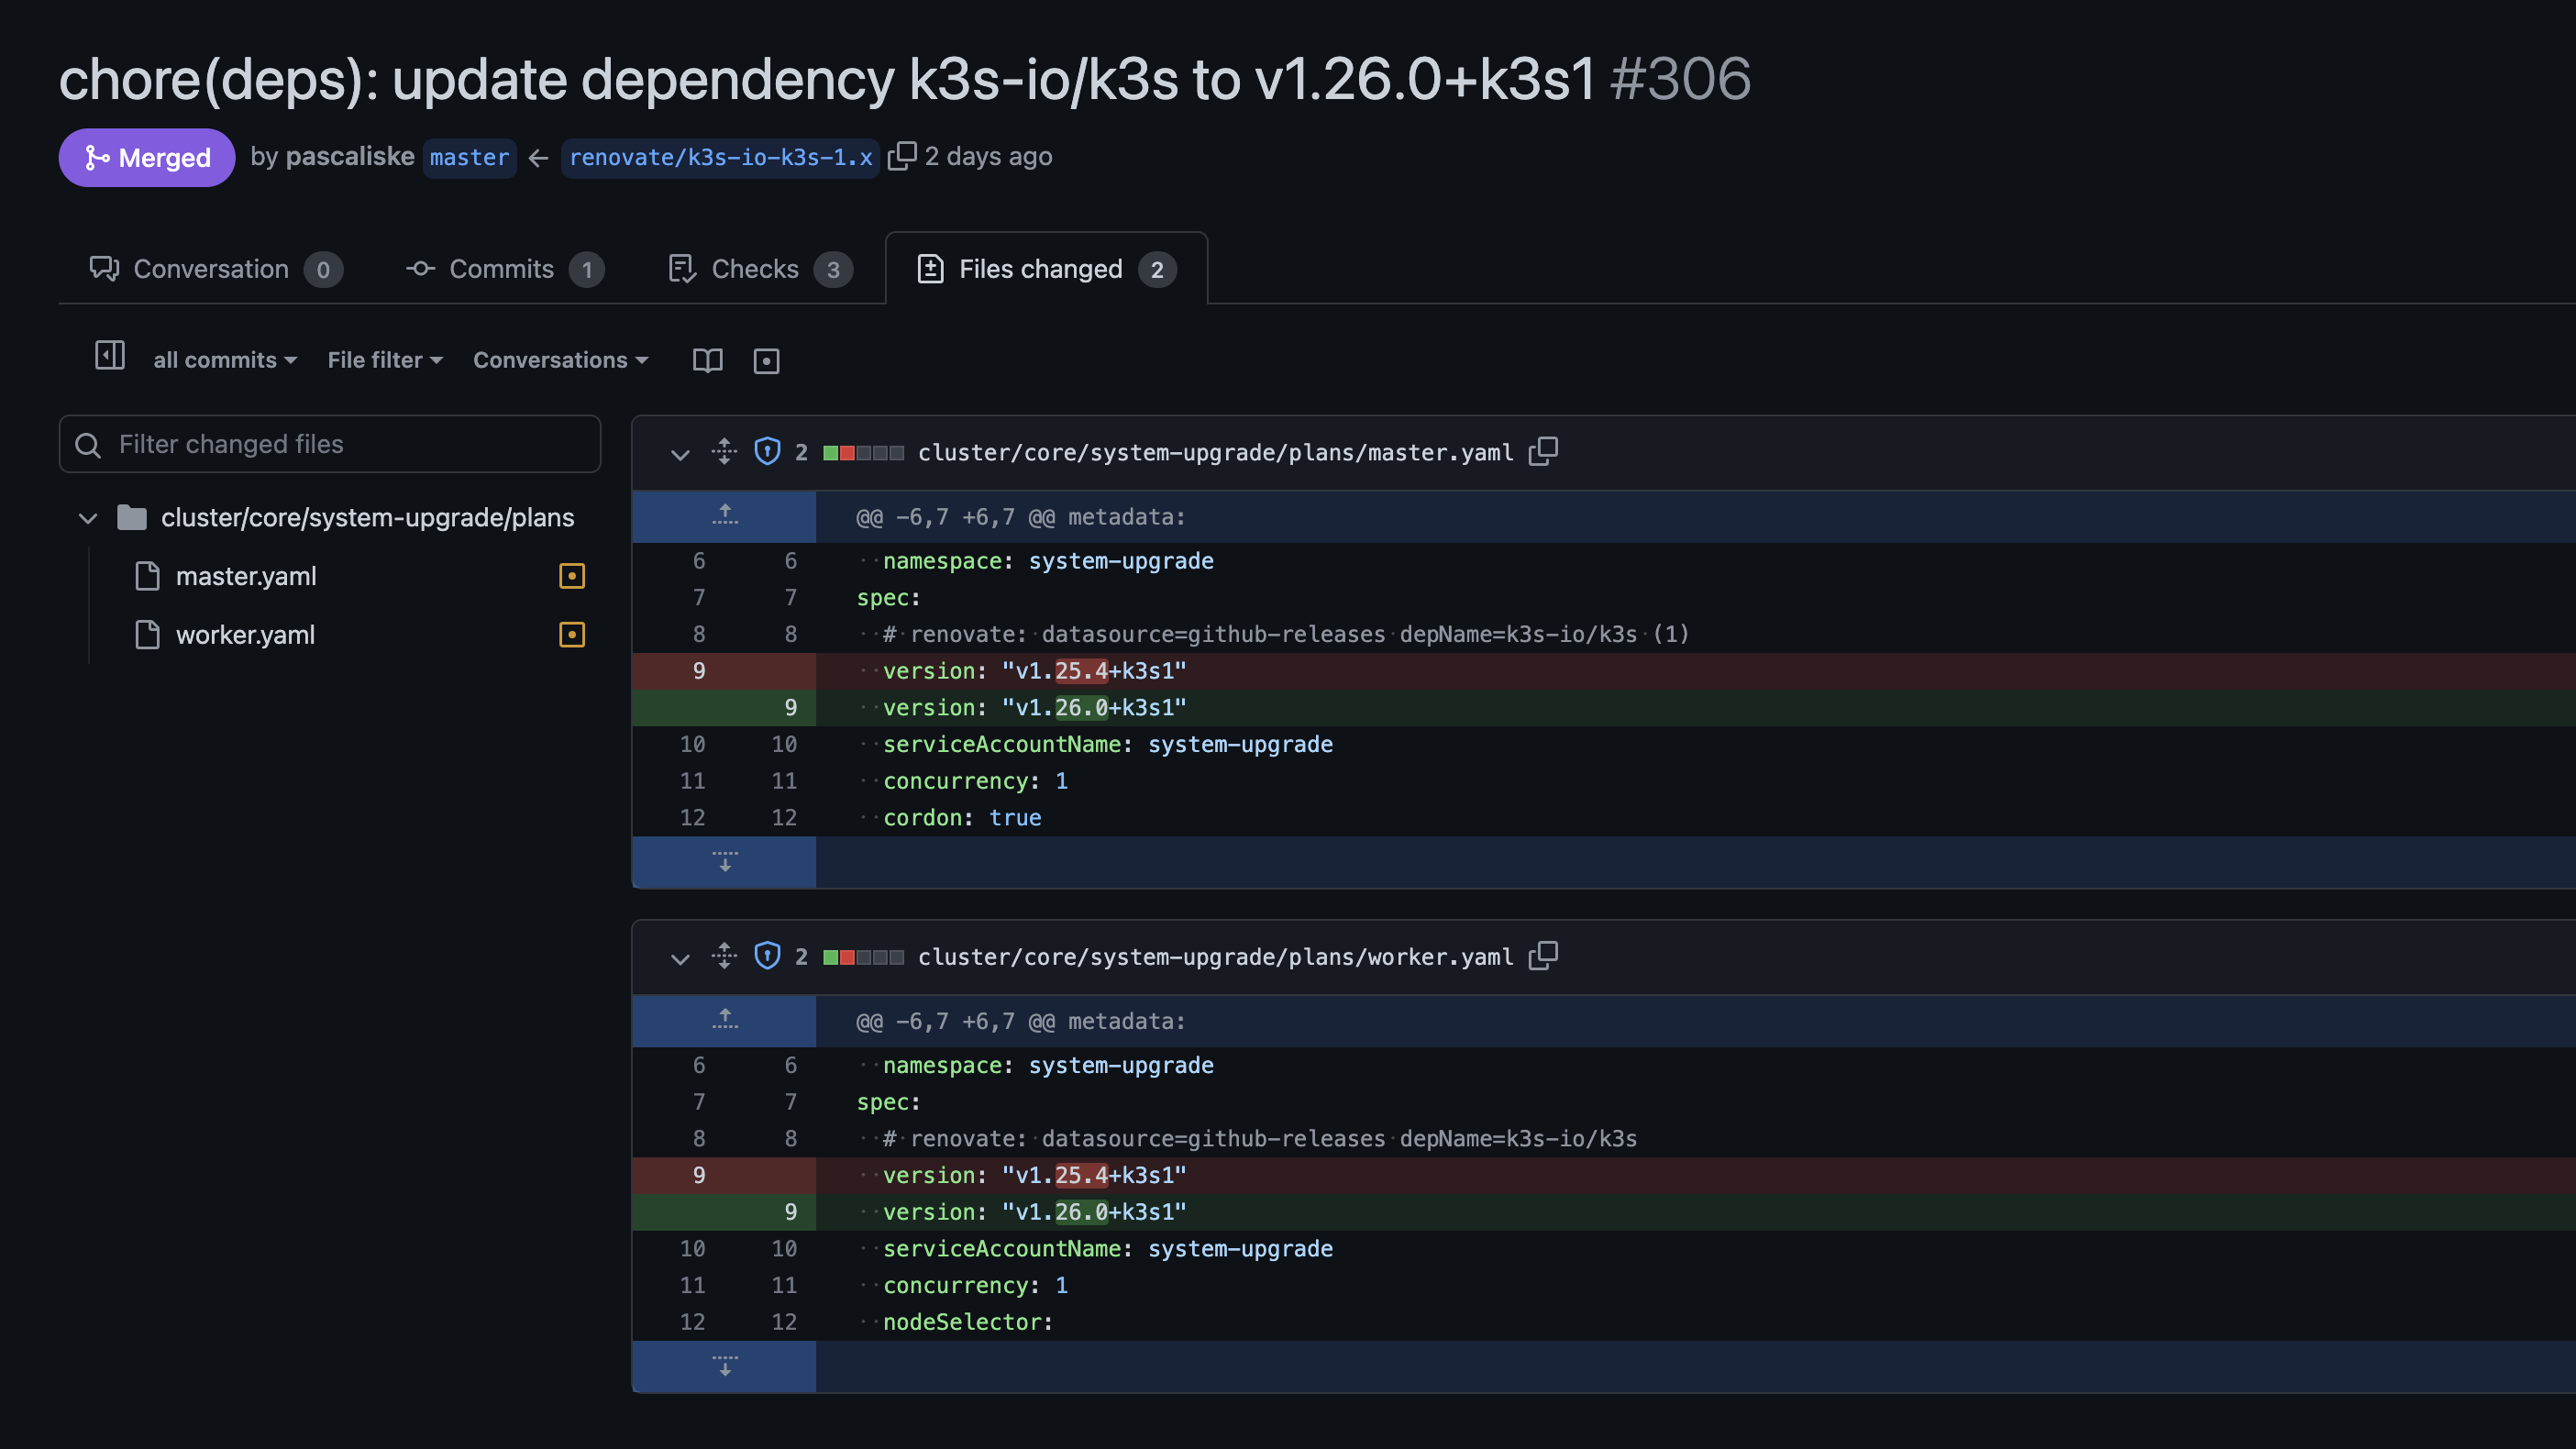 Renovate Pull Request for K3s dependency